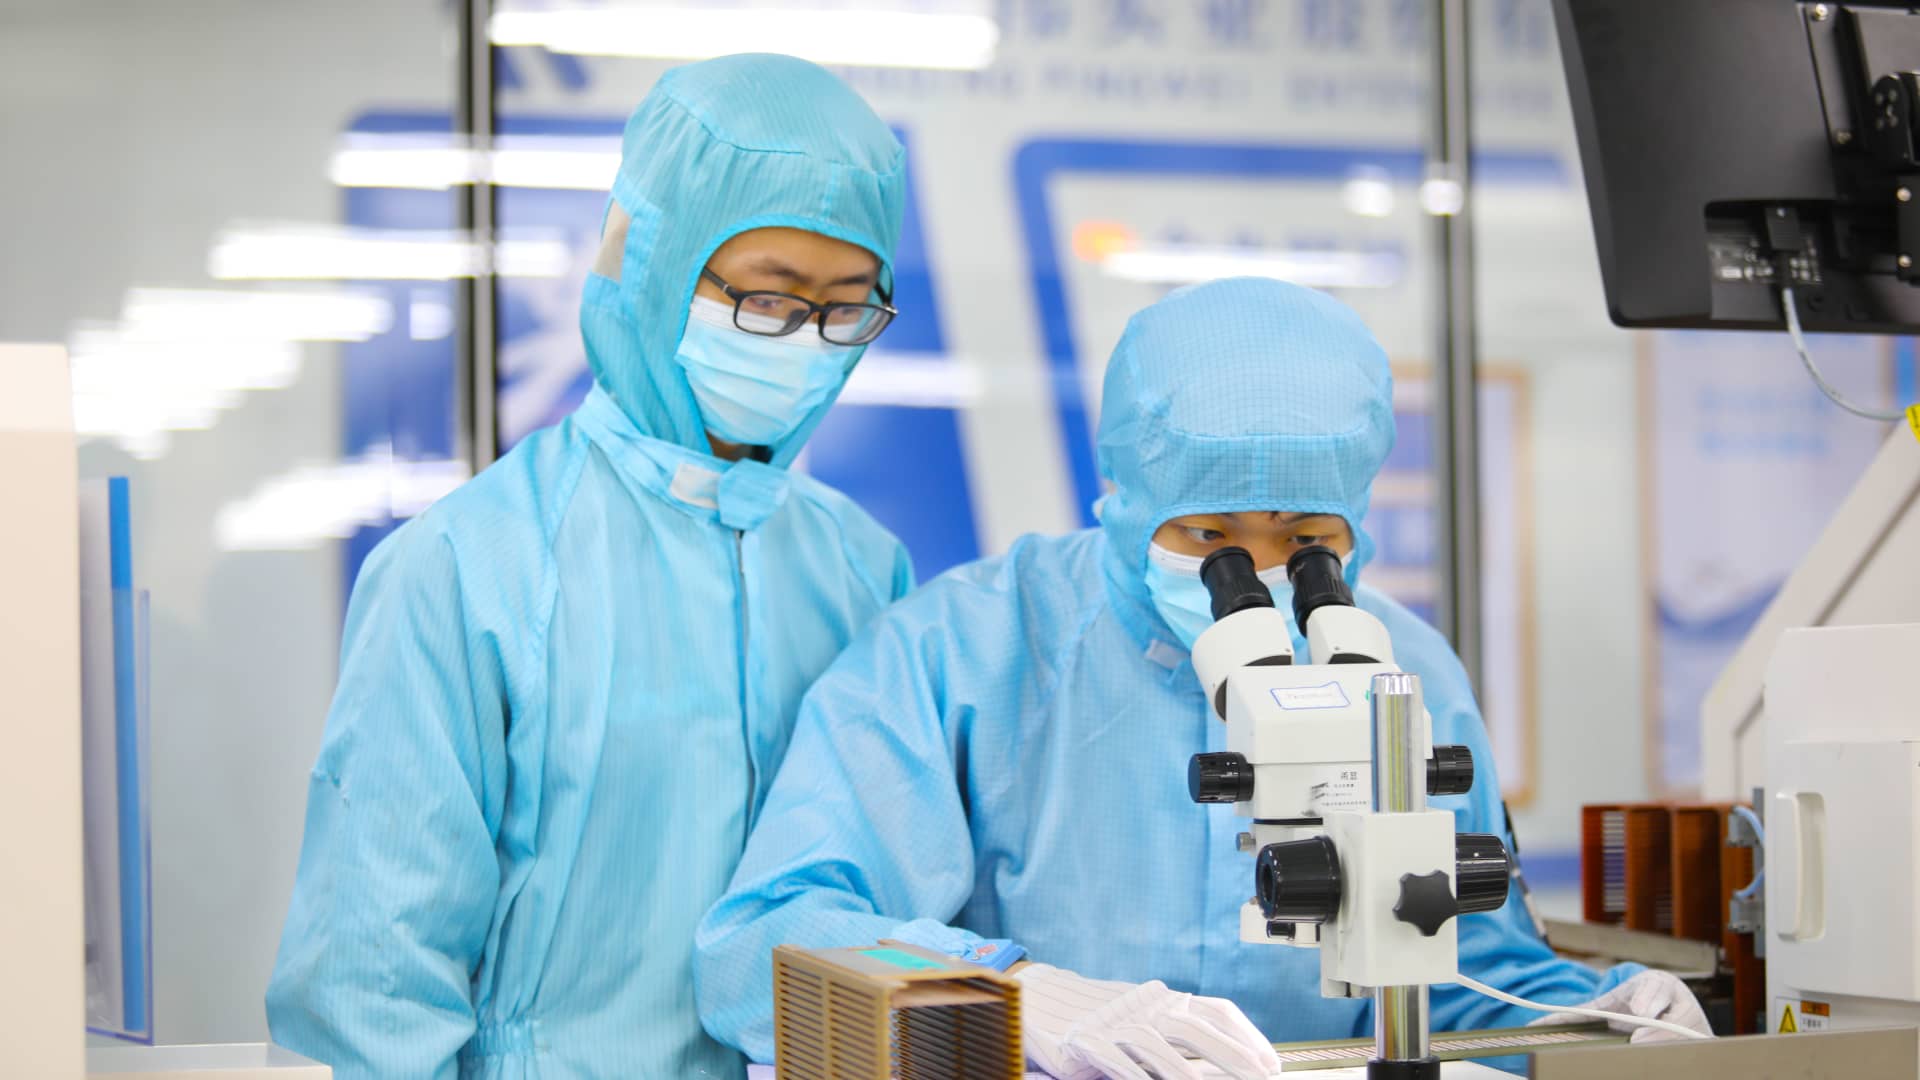 Don't underestimate China's ability to build its own advanced chips despite U.S. curbs, tech analysts say